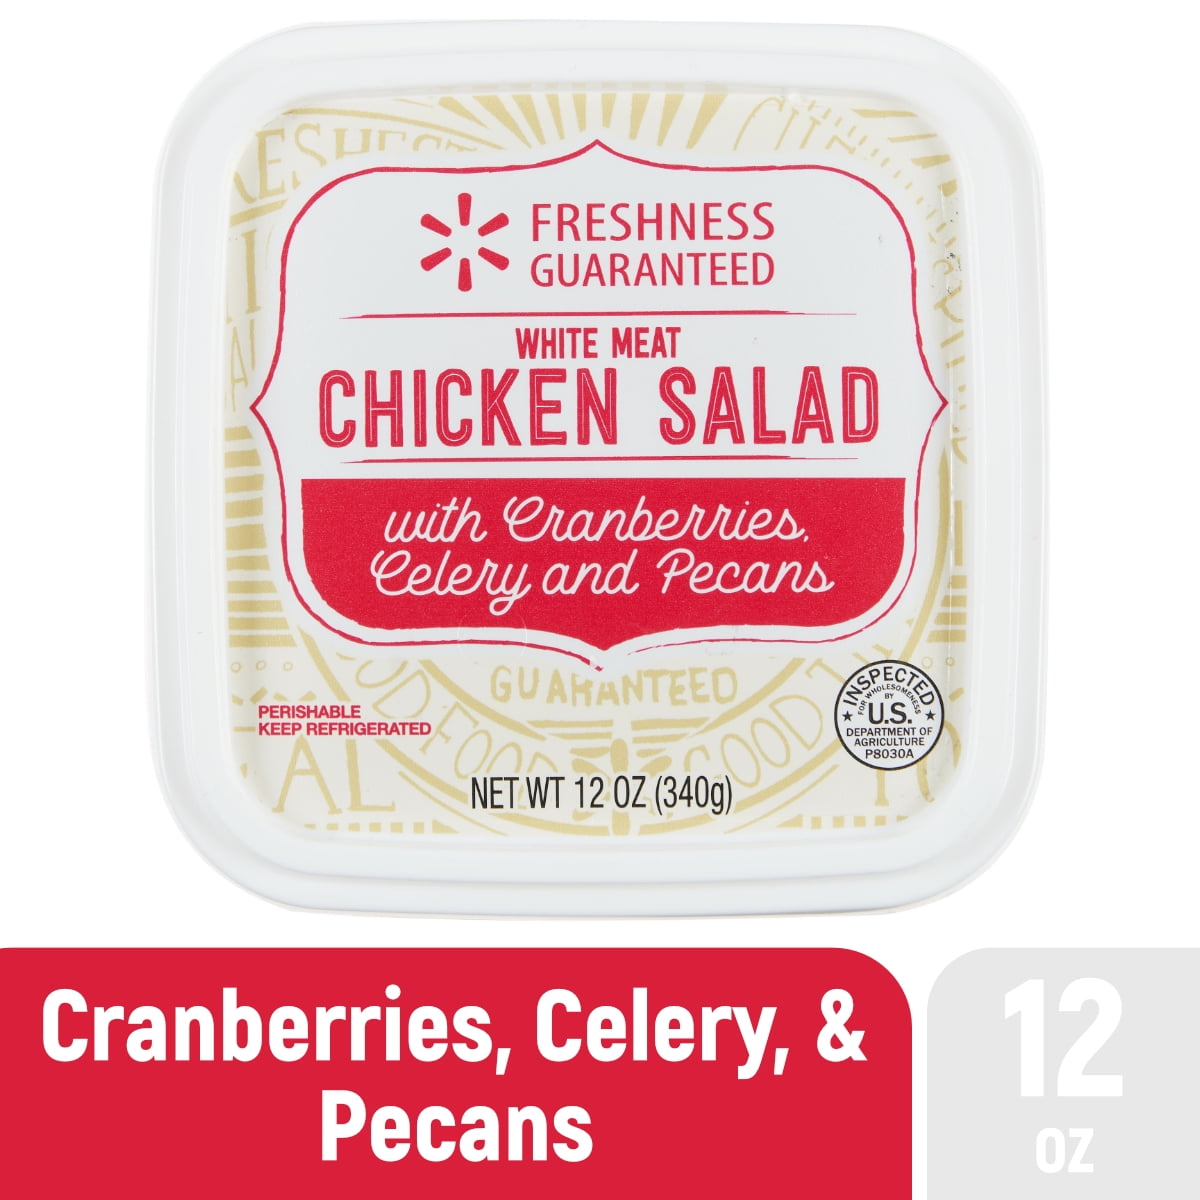 Freshness Guaranteed White Meat Chicken Salad with Cranberries, Celery, and Pecans, 12 oz